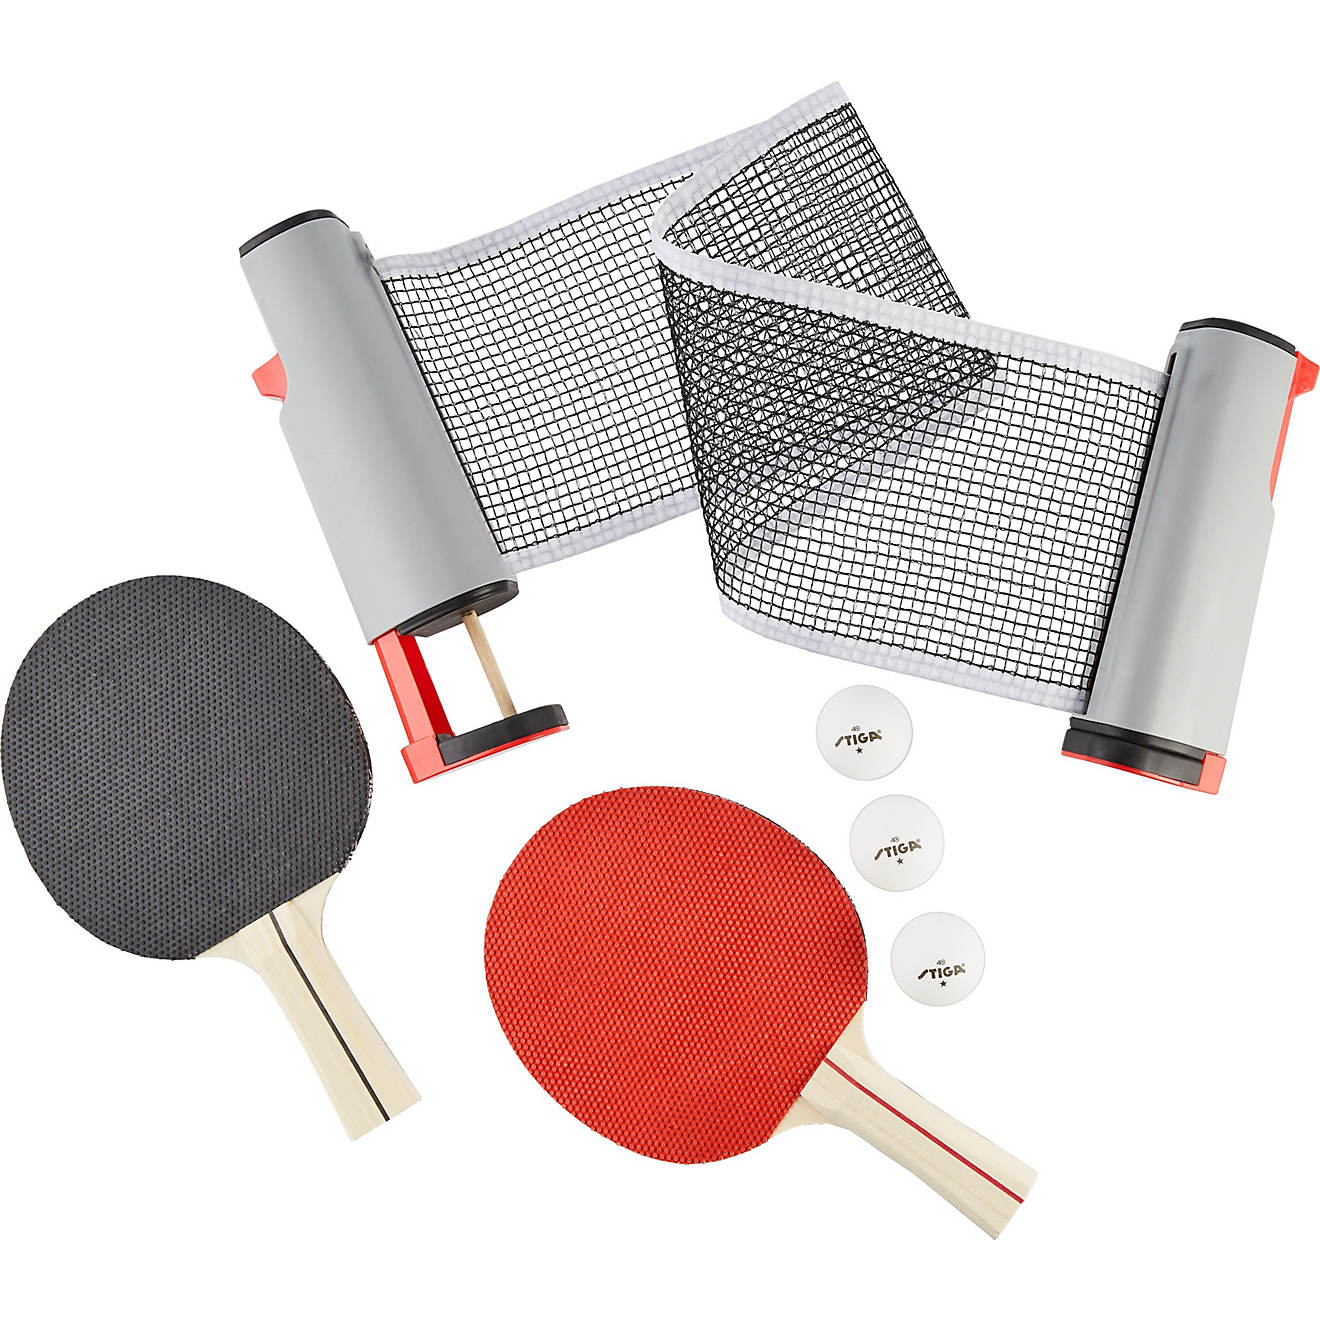 ACHENYUANYUAN Ping Pong Paddle Set with Retractable Net,Set of Play Anywhere Ping Pong Net for Any Table-Kids Adults Indoor Outdoor Activities 